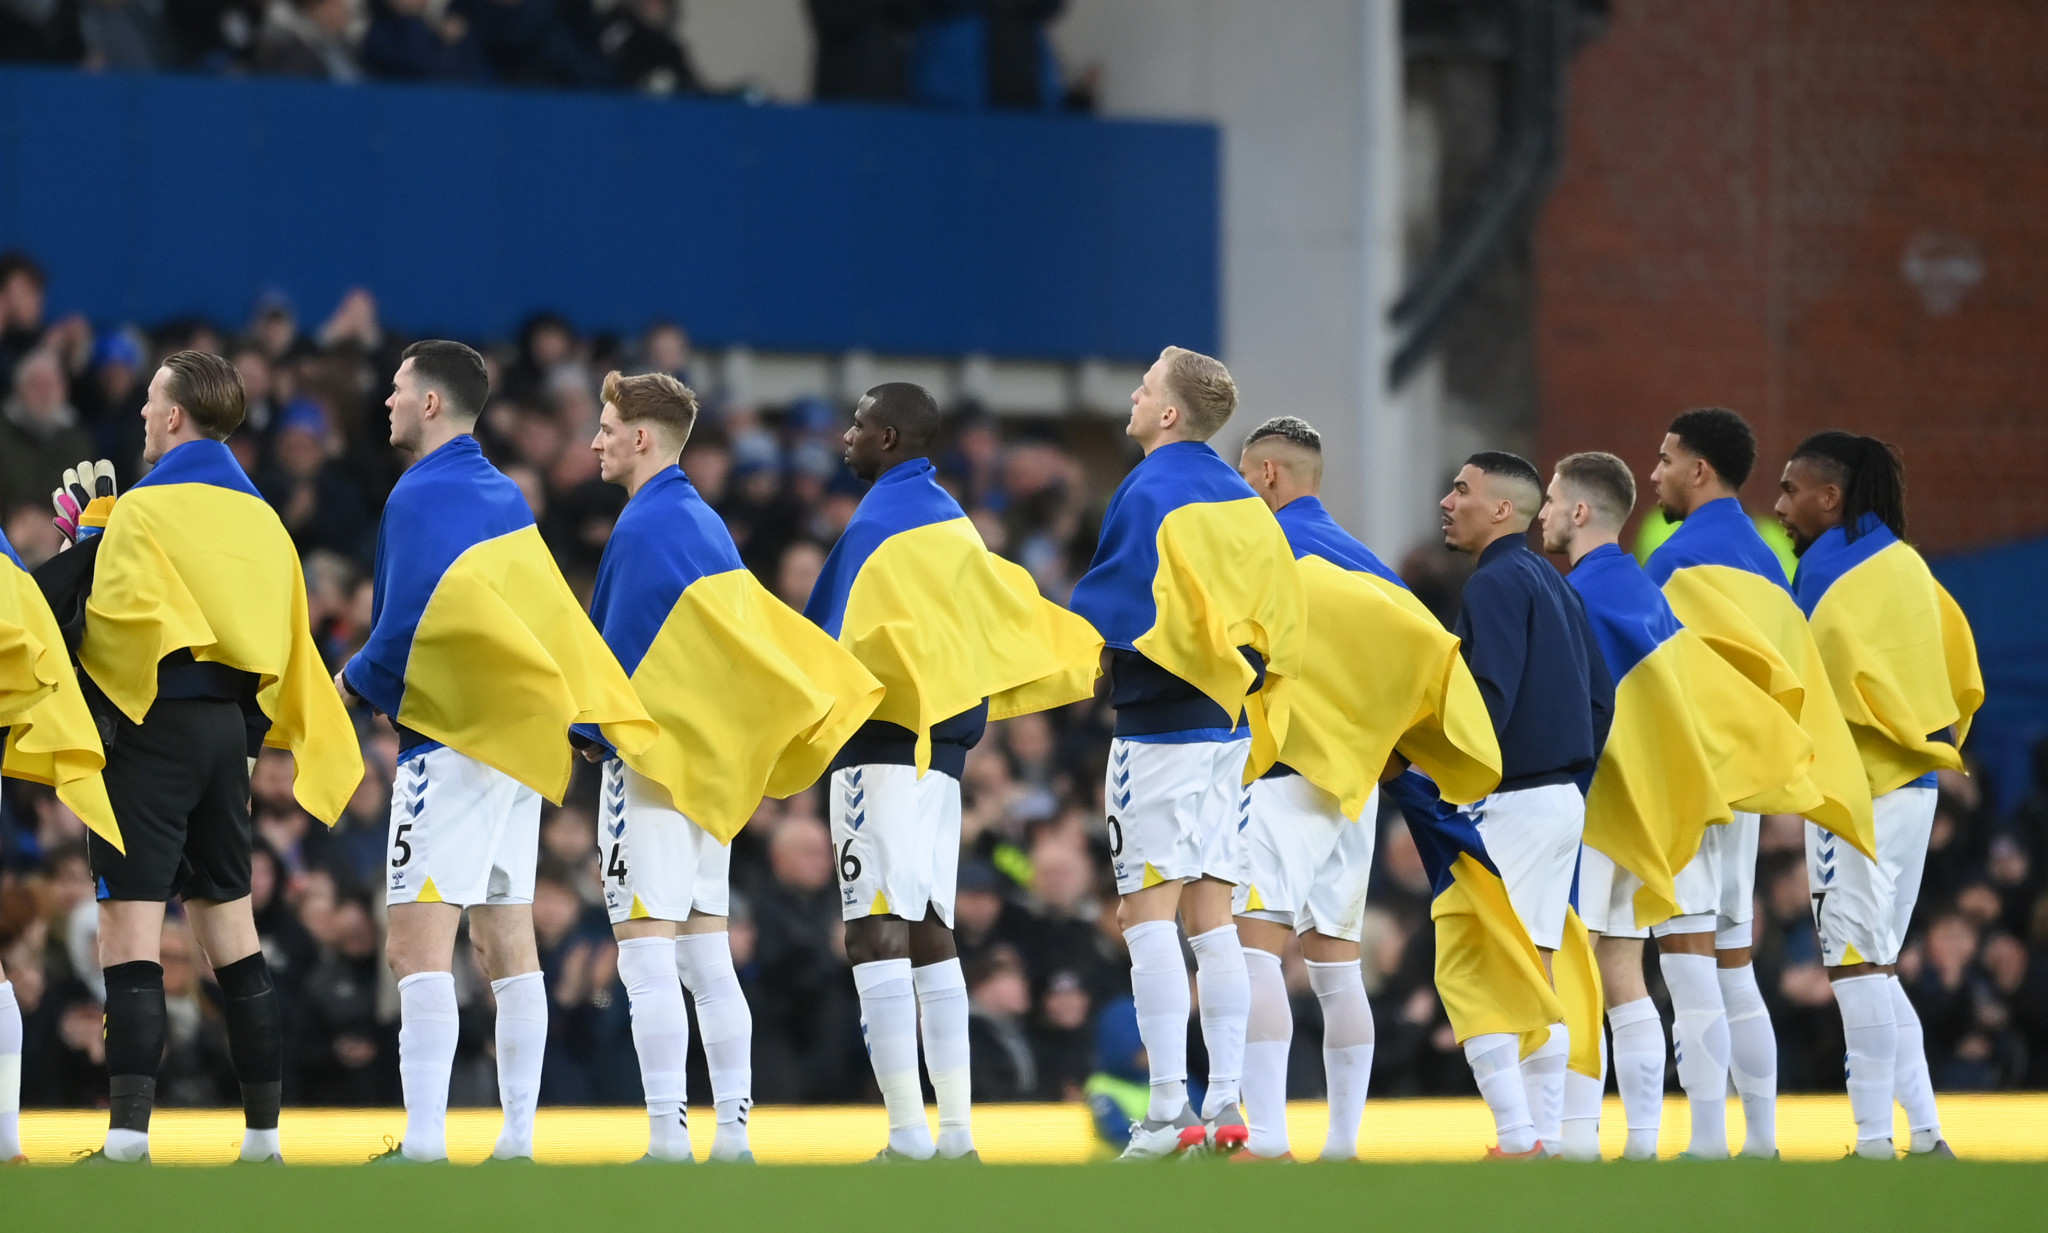 Everton's players were draped in Ukrainian flags as they took to the pitch for their match on Saturday ©Getty Images